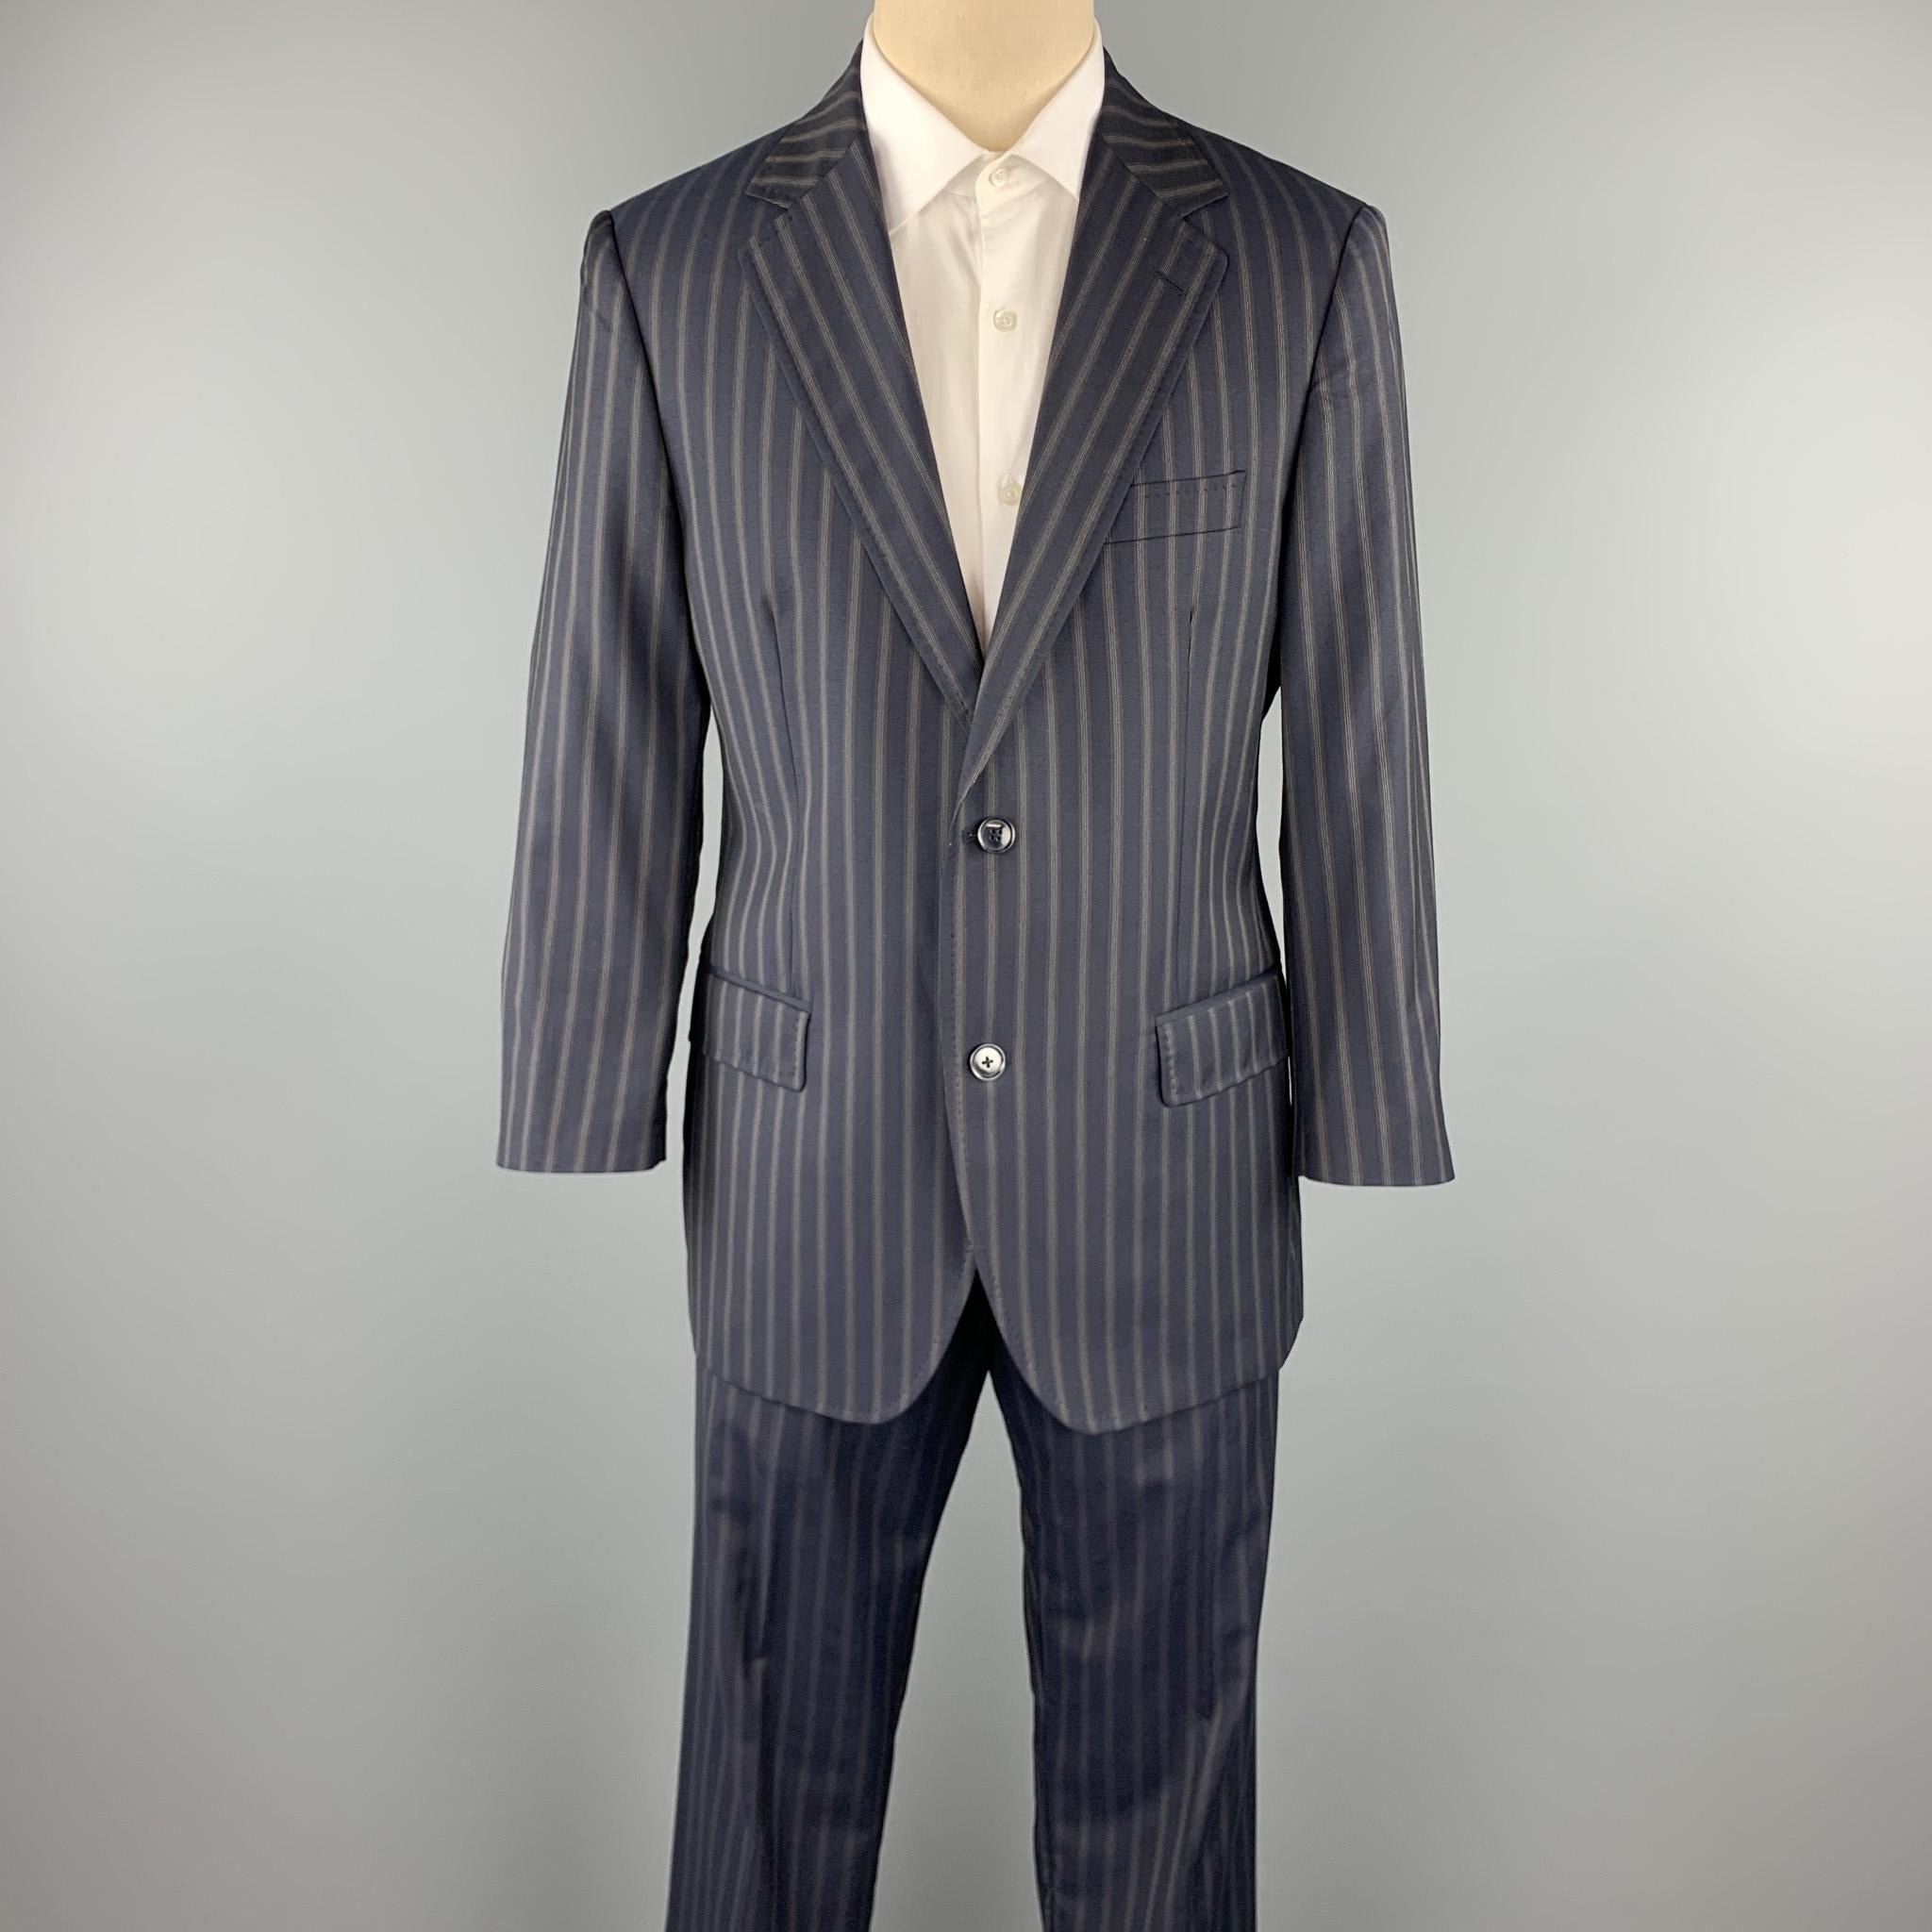 DOLCE & GABBANA suit comes in a navy stripe wool with a monogram liner and includes a single breasted, two button sport coat with a notch lapel and matching  pleated cuff front trousers.  Made in Italy.

Excellent Pre-Owned Condition.
Marked: IT